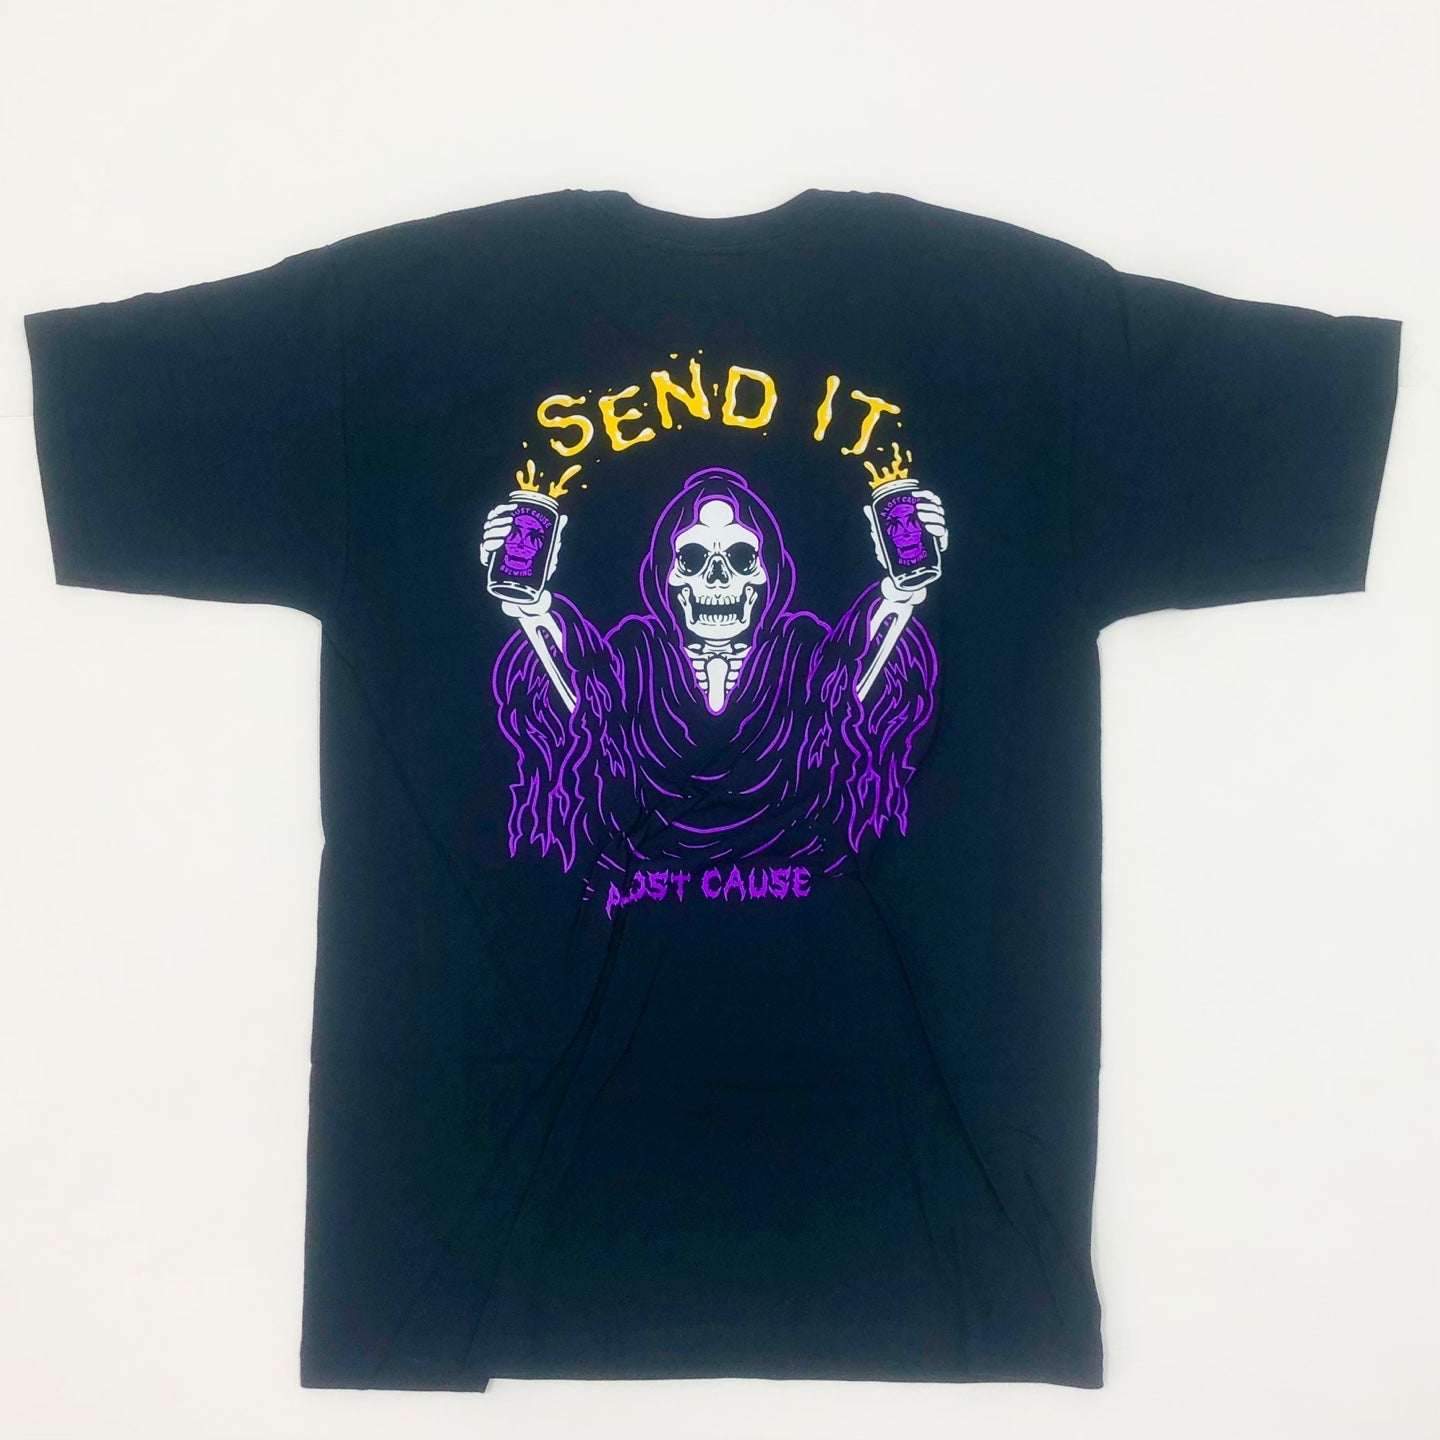 A LOST CAUSE Send It V2 Graphic T-Shirt